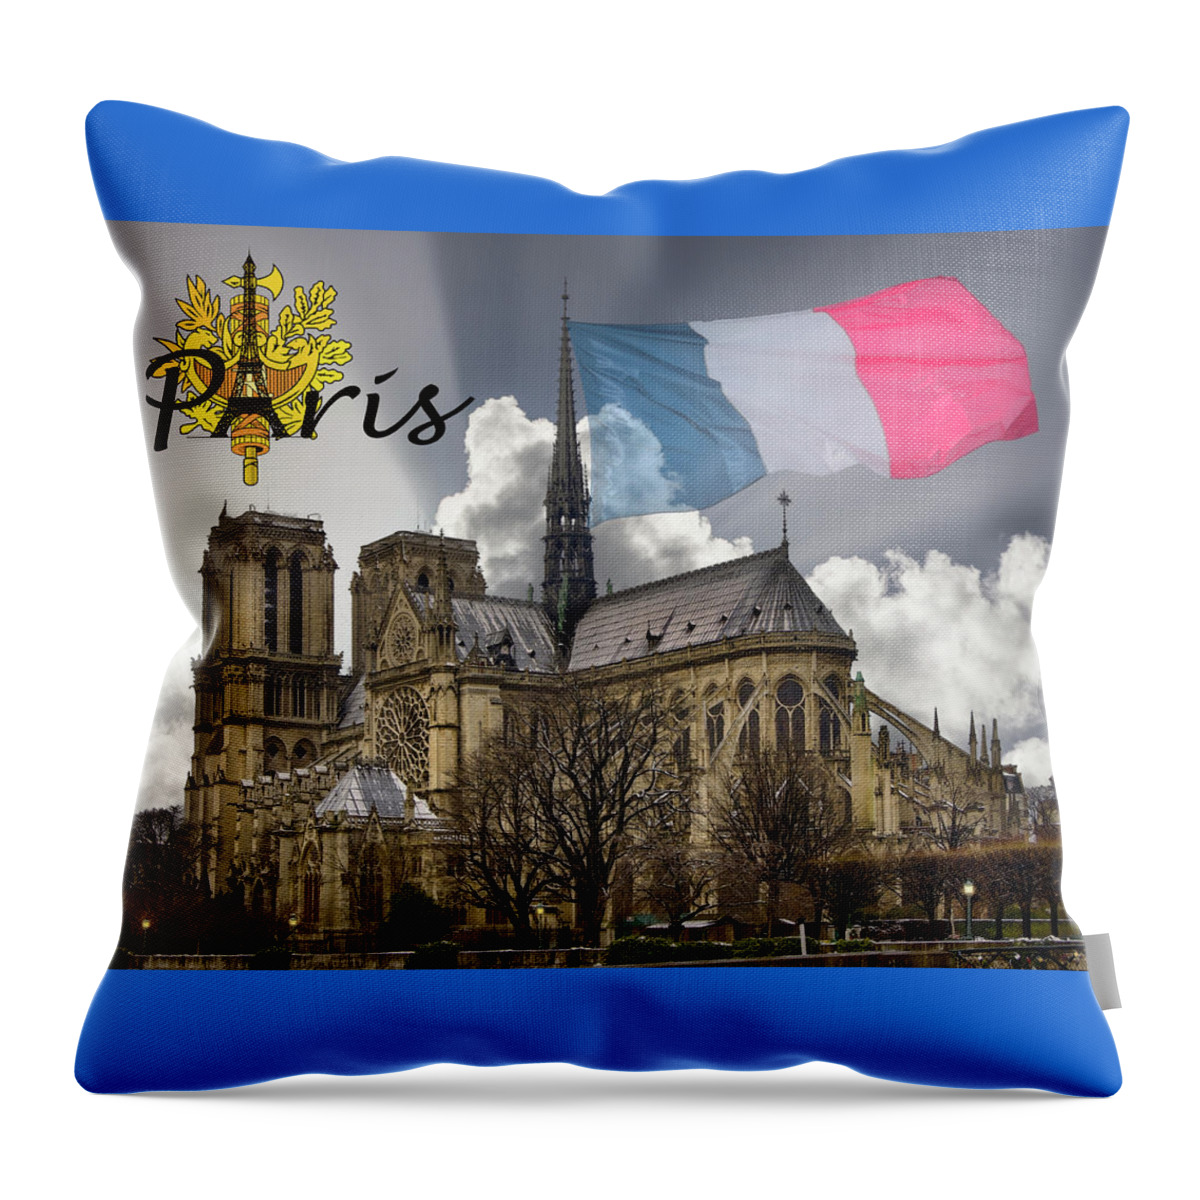 Clouds Throw Pillow featuring the photograph The Iconic Notre Dame de Paris by Debra and Dave Vanderlaan